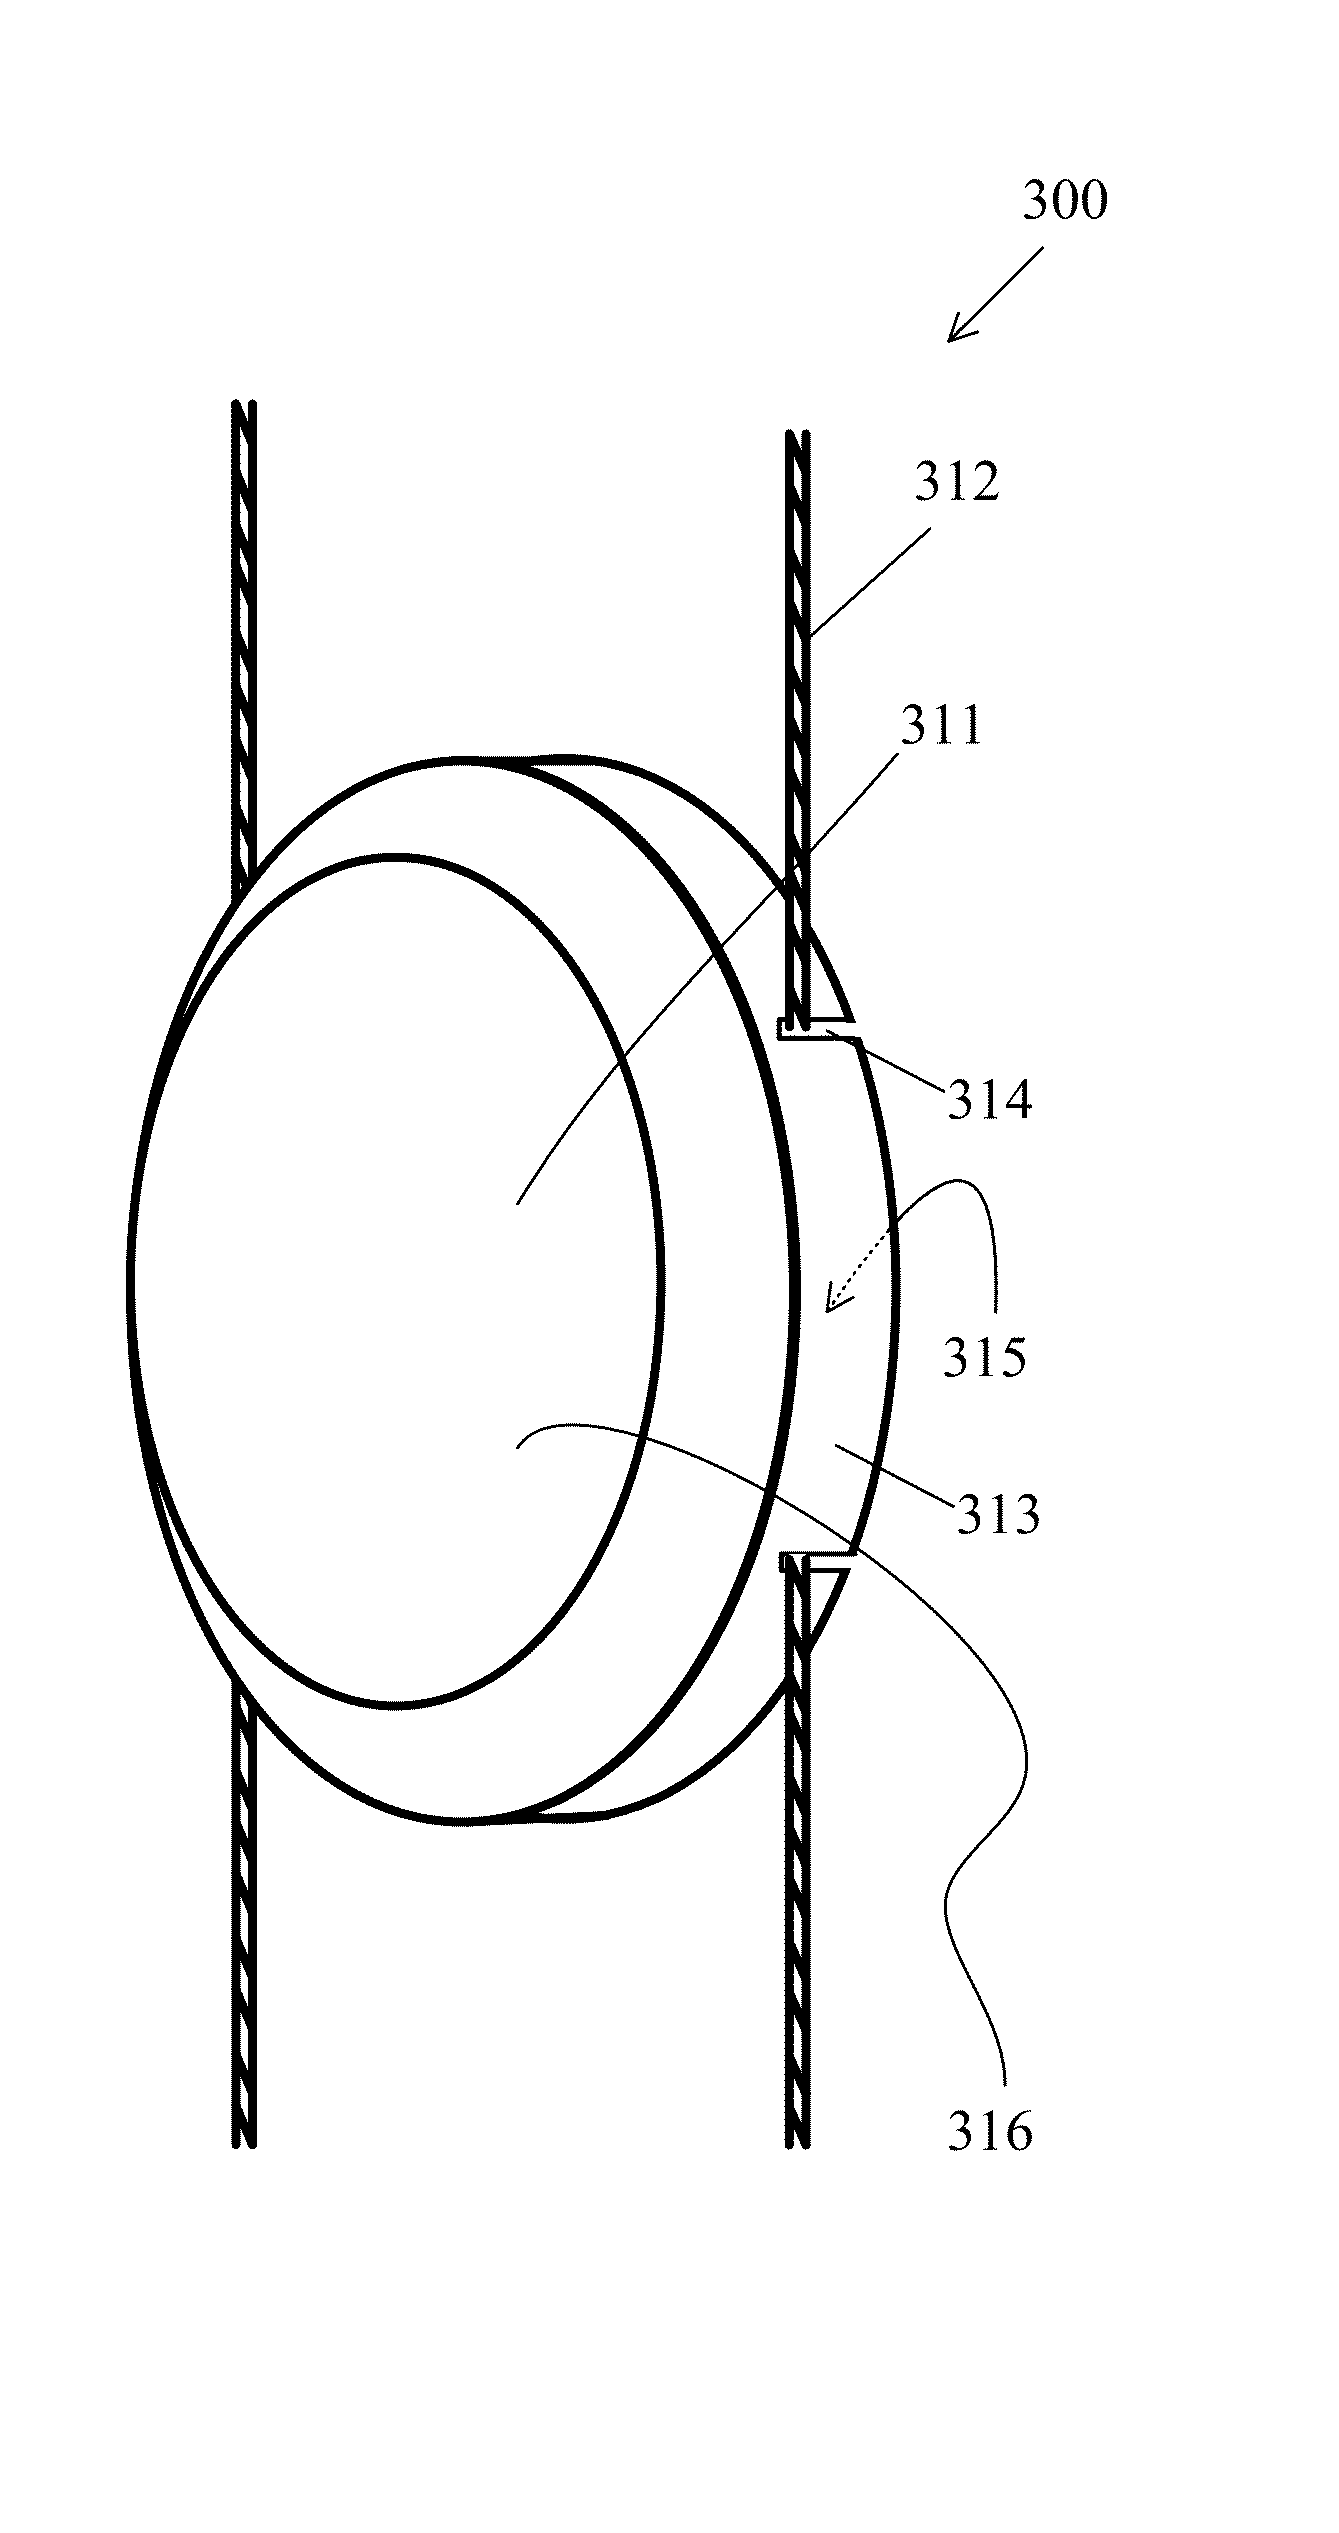 Frangible target suspension apparatuses and methods of use thereof